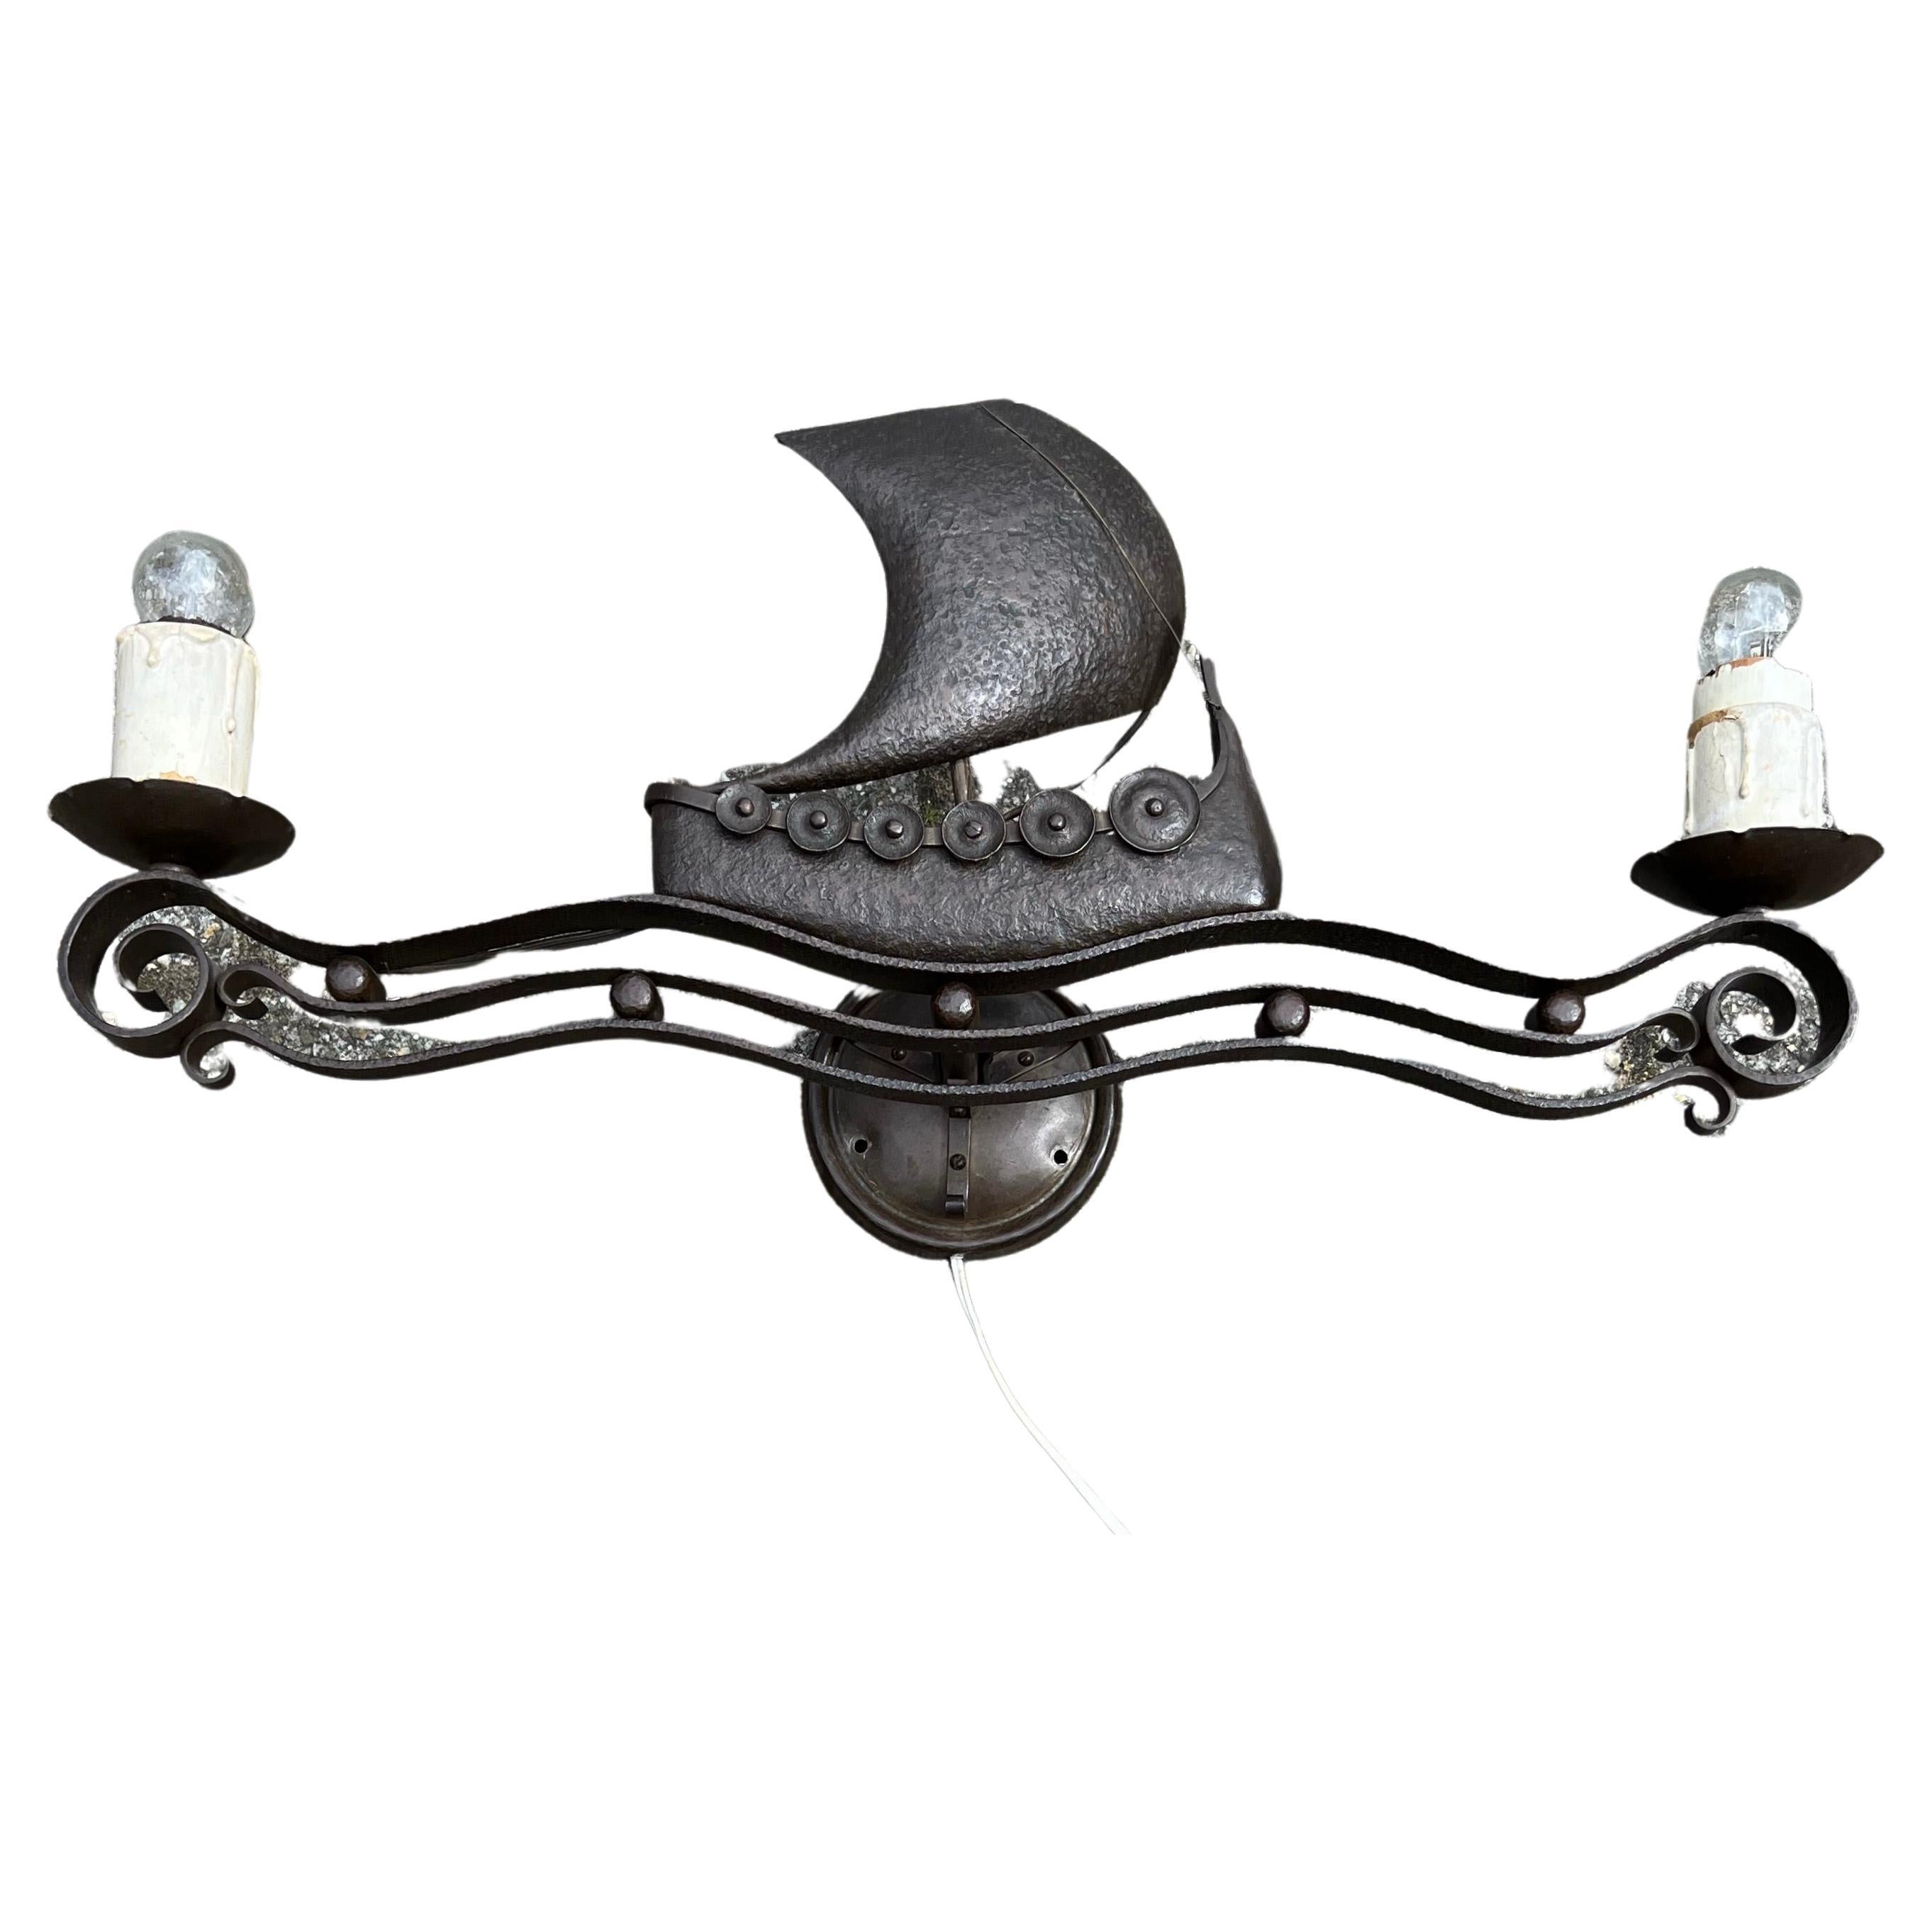 Unique Antique Arts & Crafts Wrought Iron Viking Ship Sailing on Sea Wall Sconce